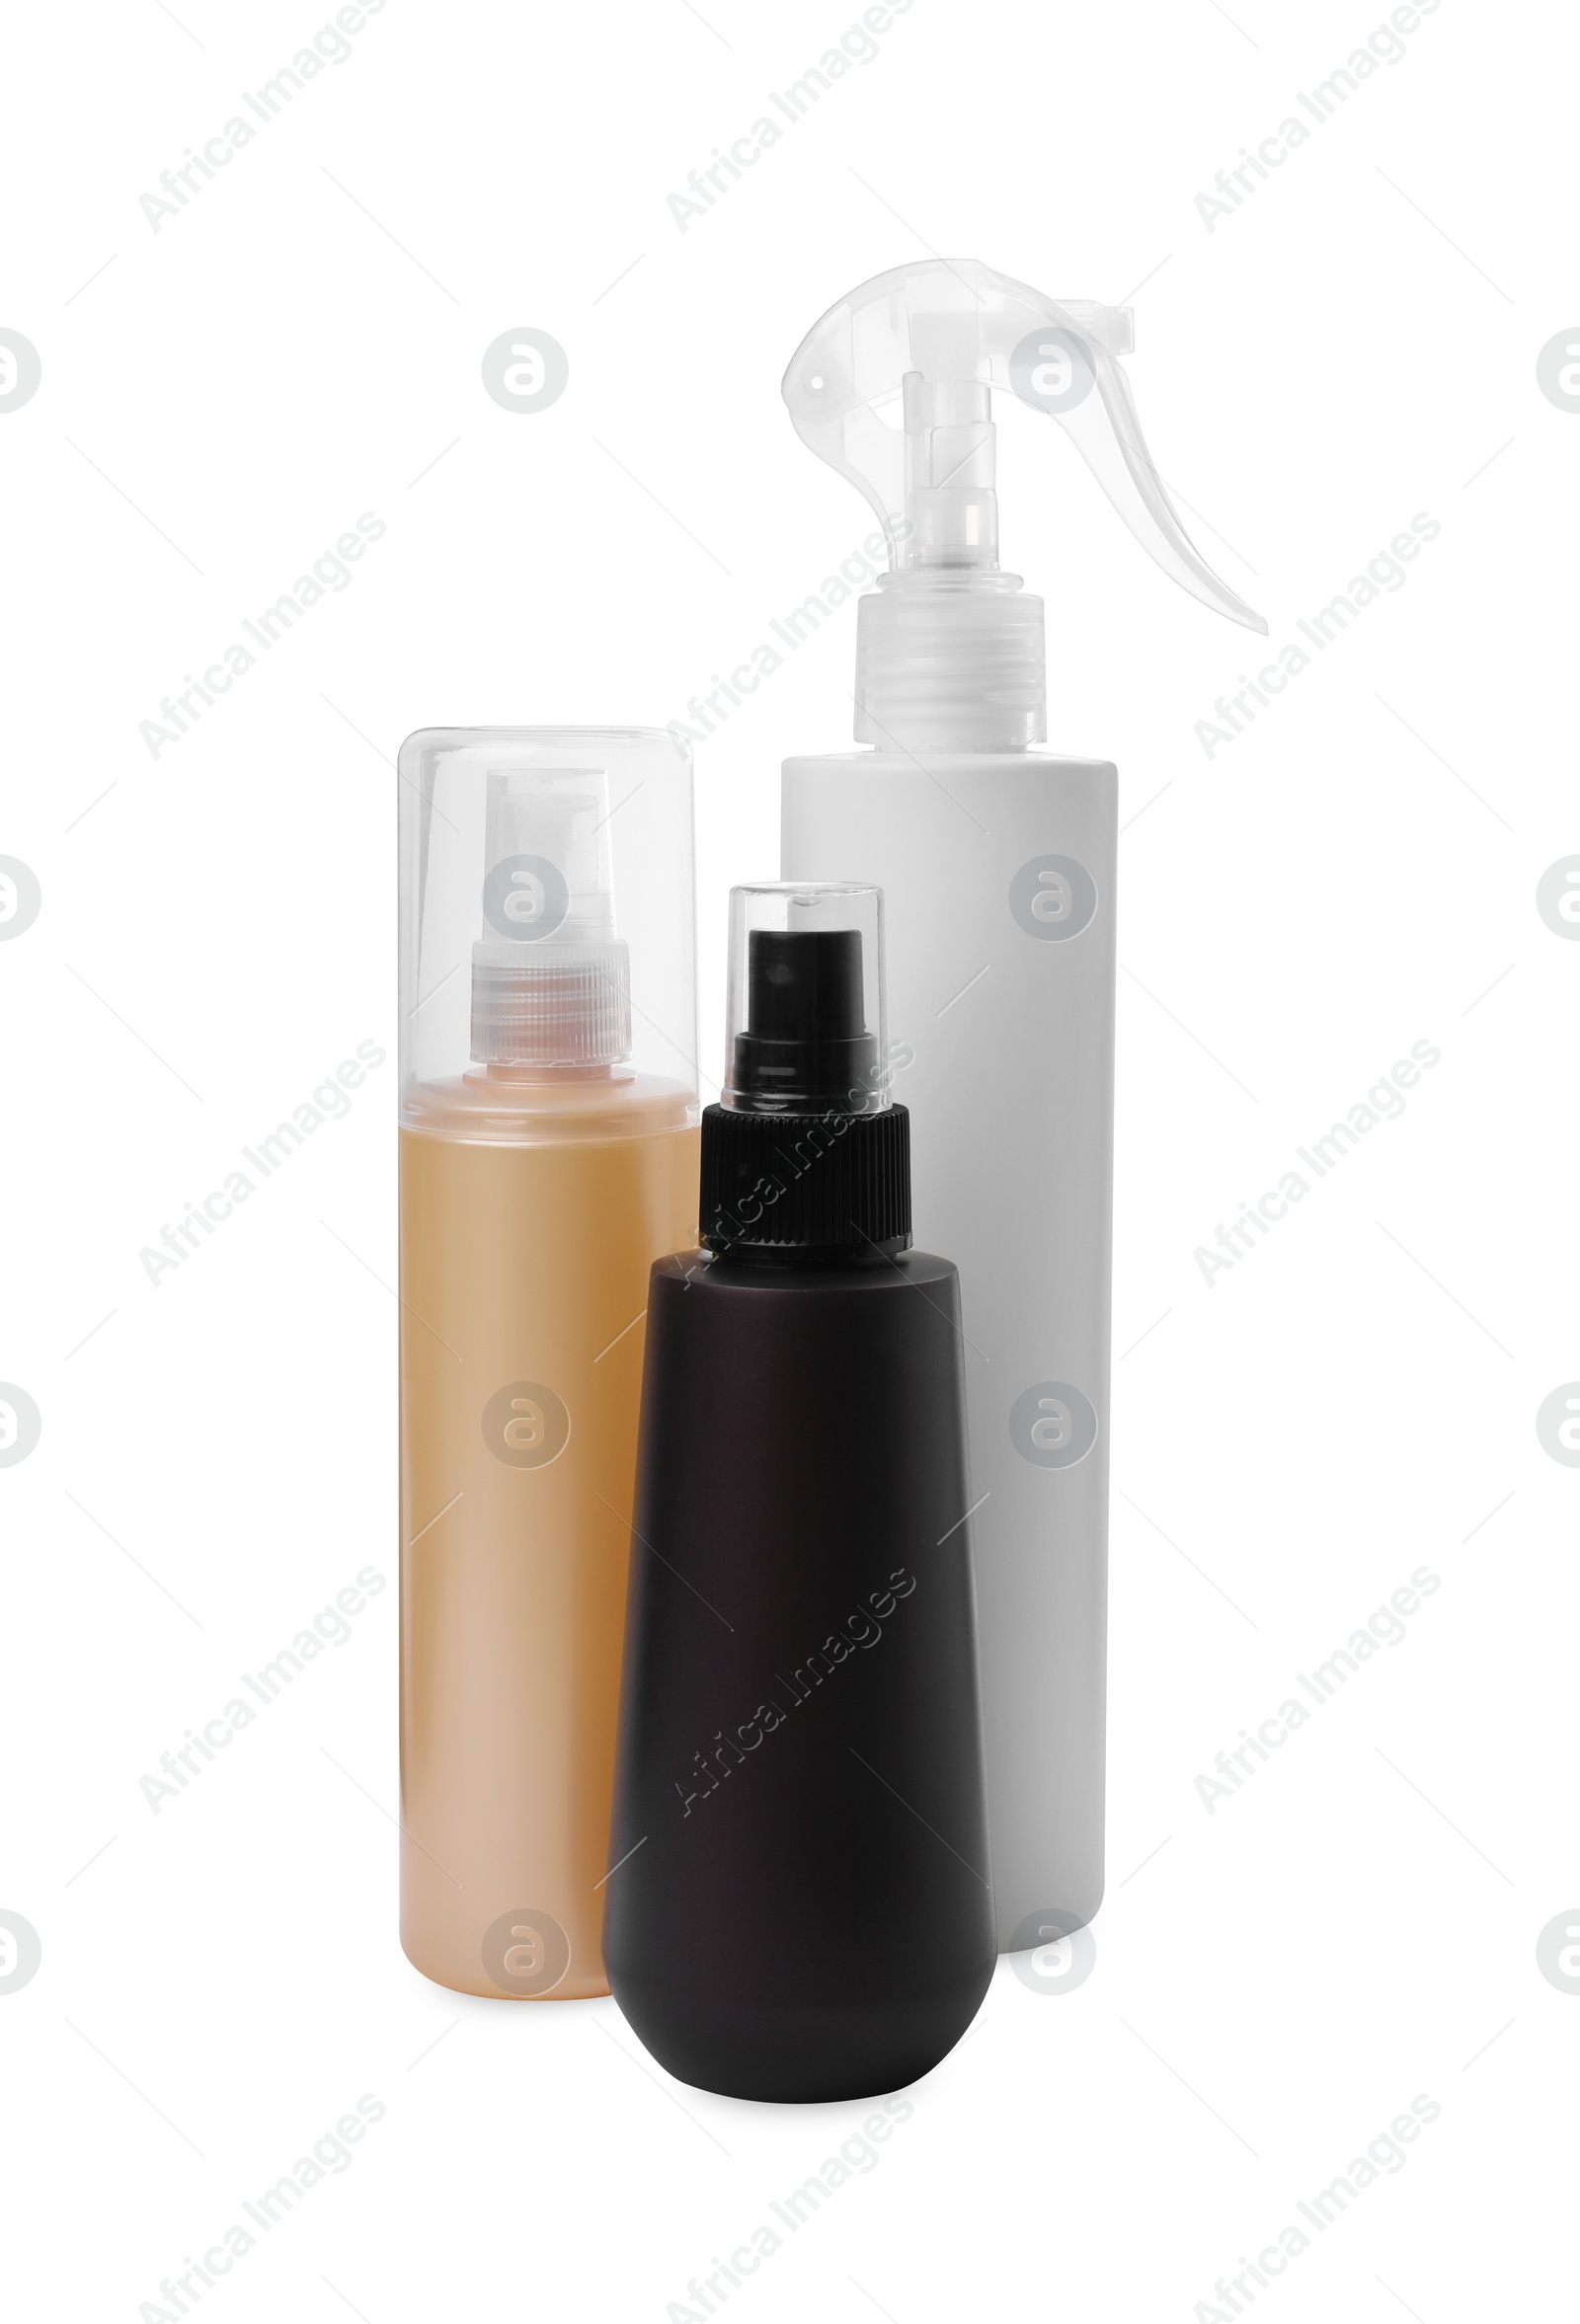 Photo of Spray bottles with hair thermal protection isolated on white